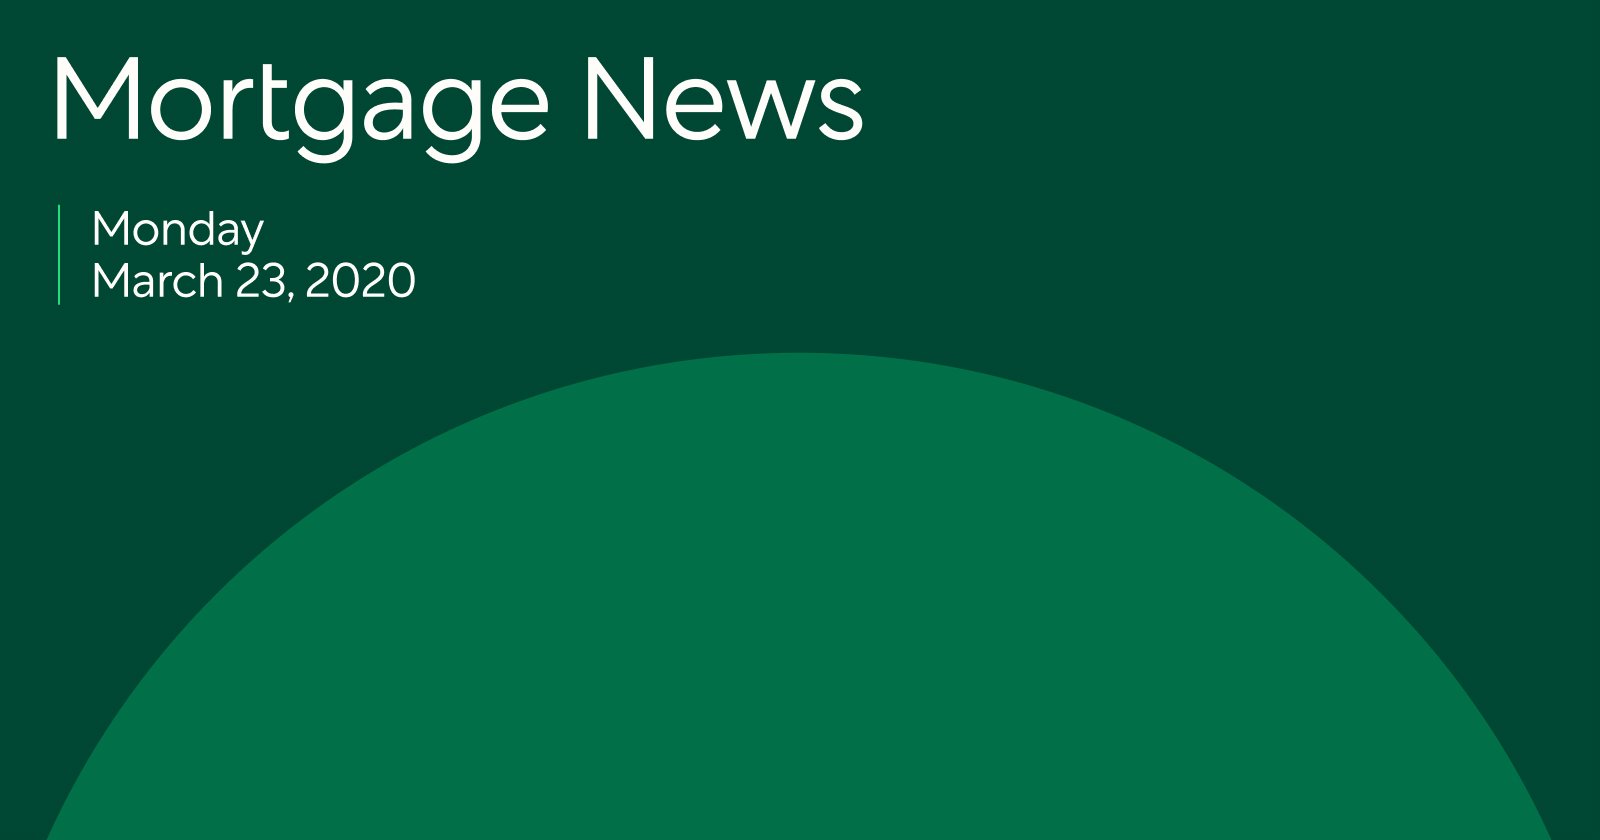  Mortgage News: Published by Better March 23, 2020